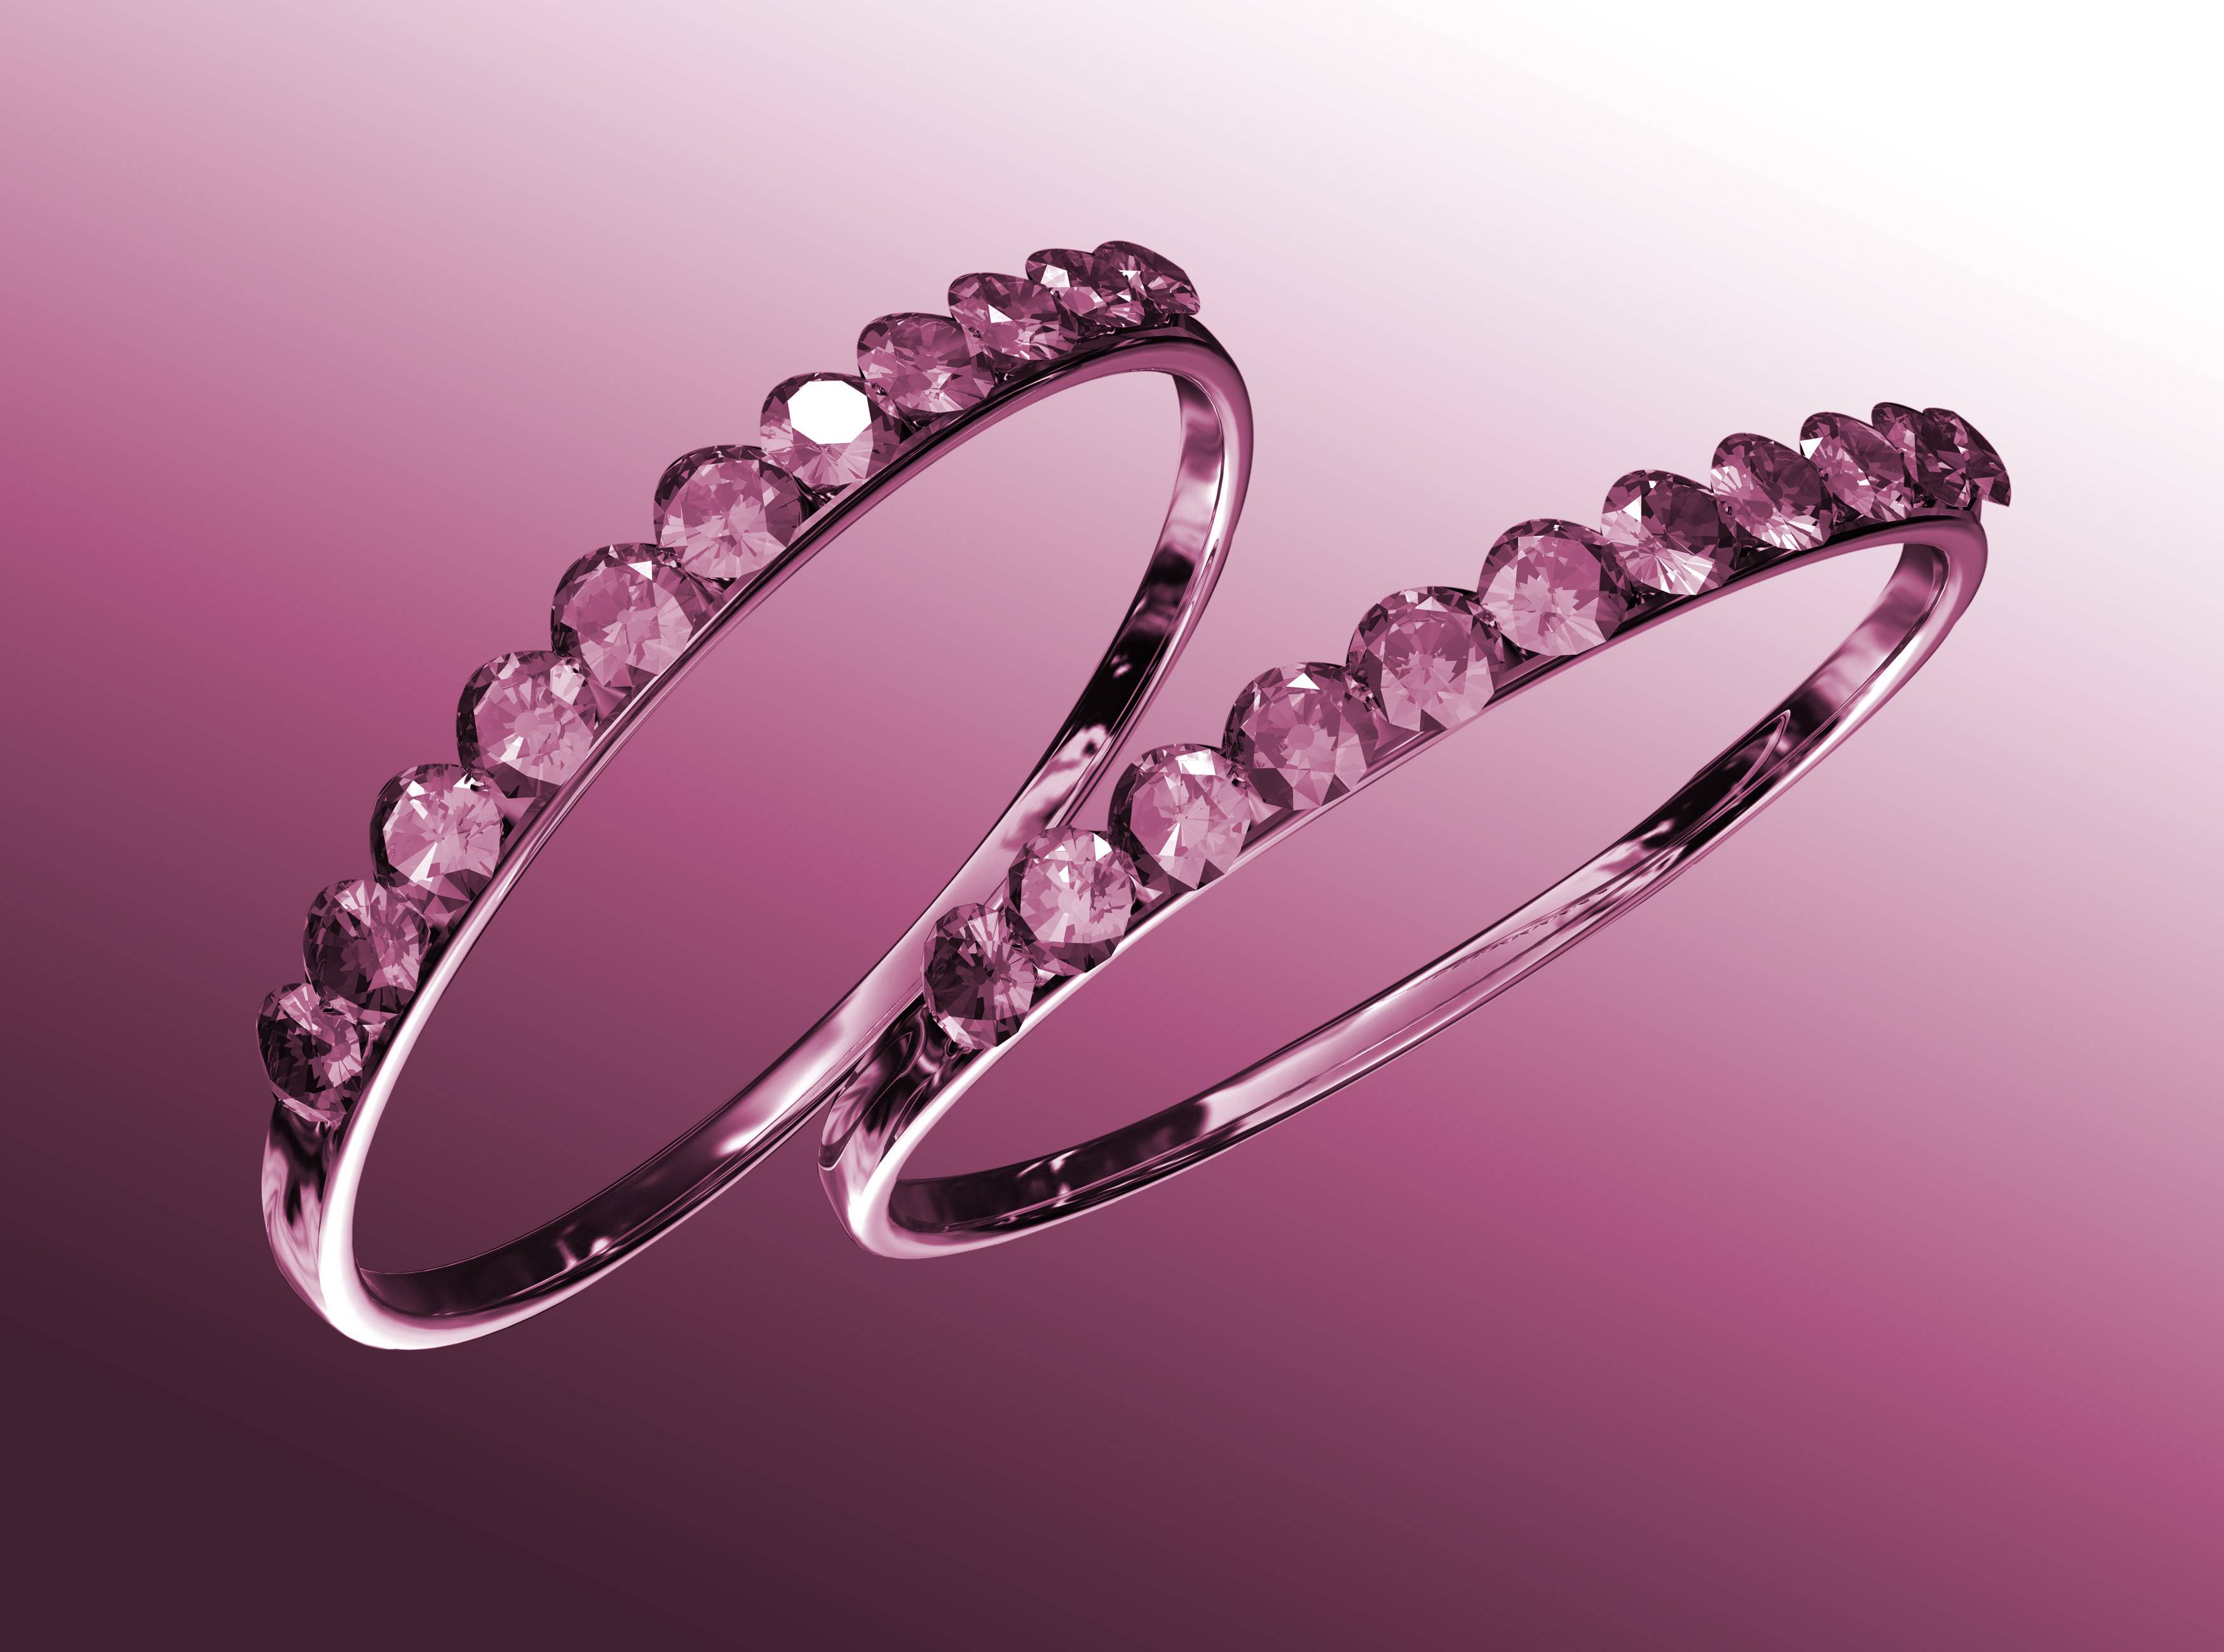 Two rings with diamonds against a pink background